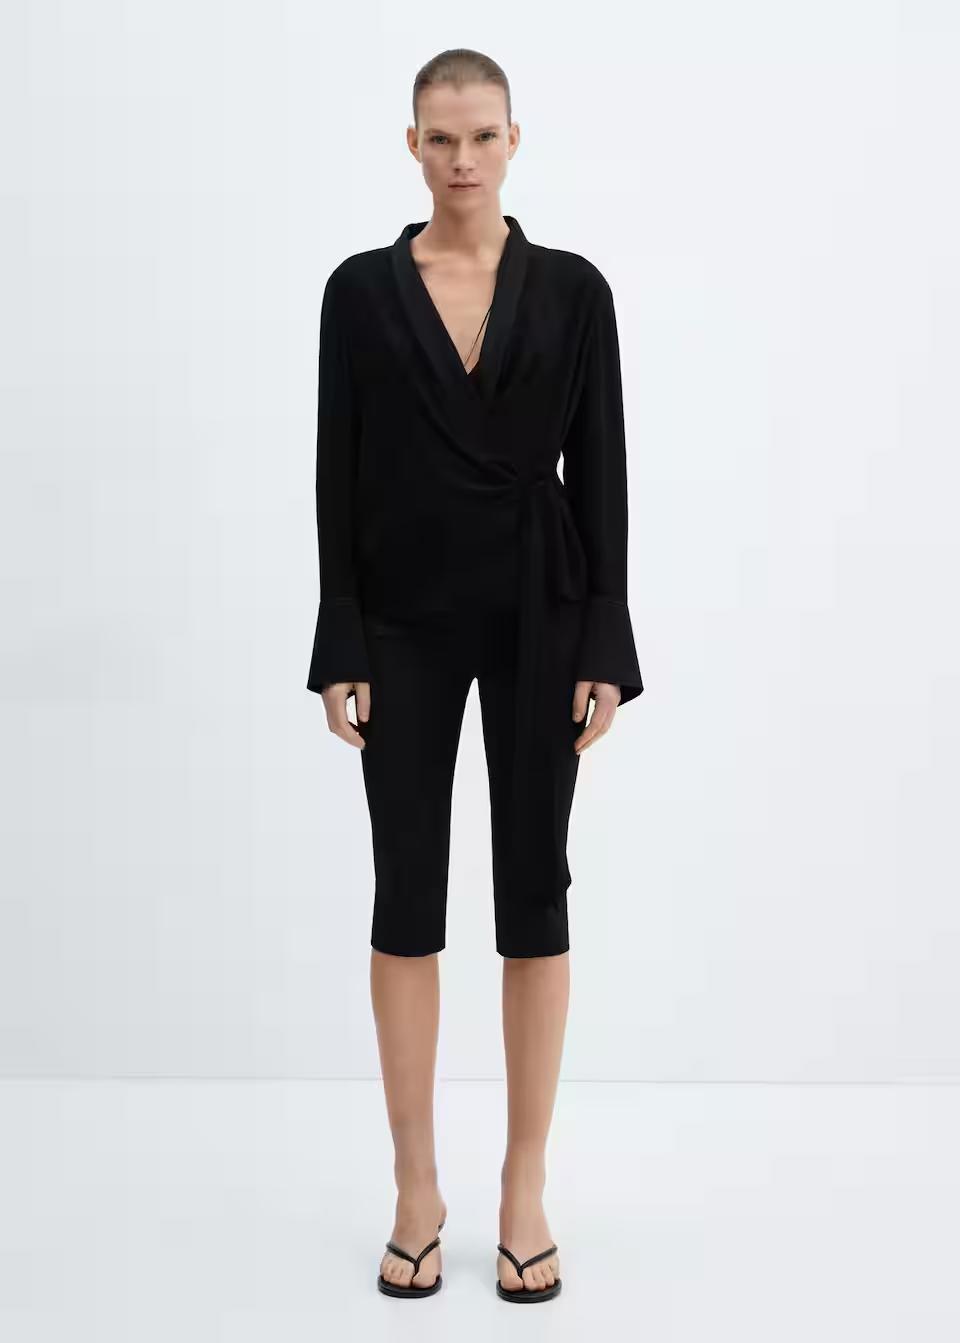 Mango - Black Double-Breasted Blouse With Bow